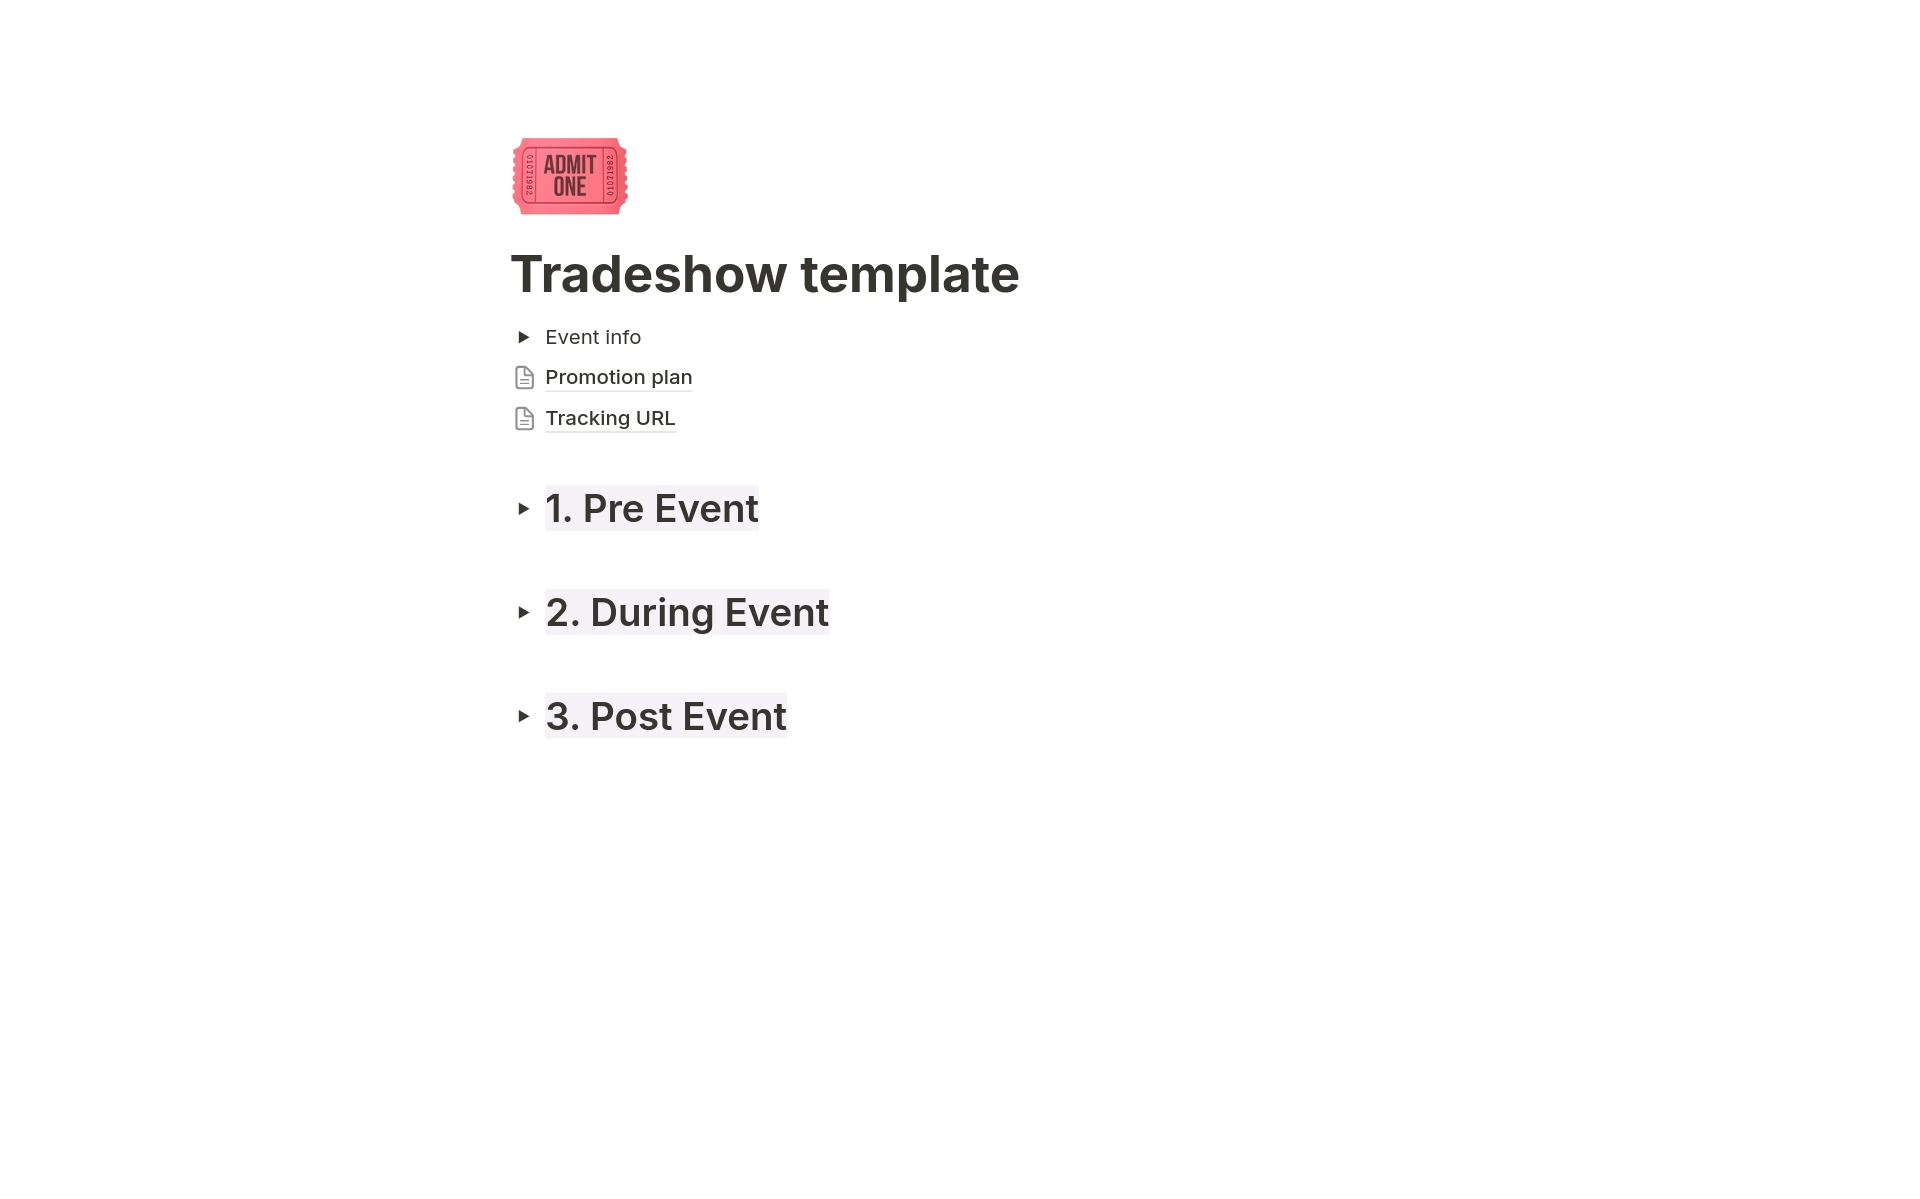 Workflow of preparing for your tradeshow event. It's what I apply at my tech job for B2B SaaS company, but this can be replicated in other industries. 